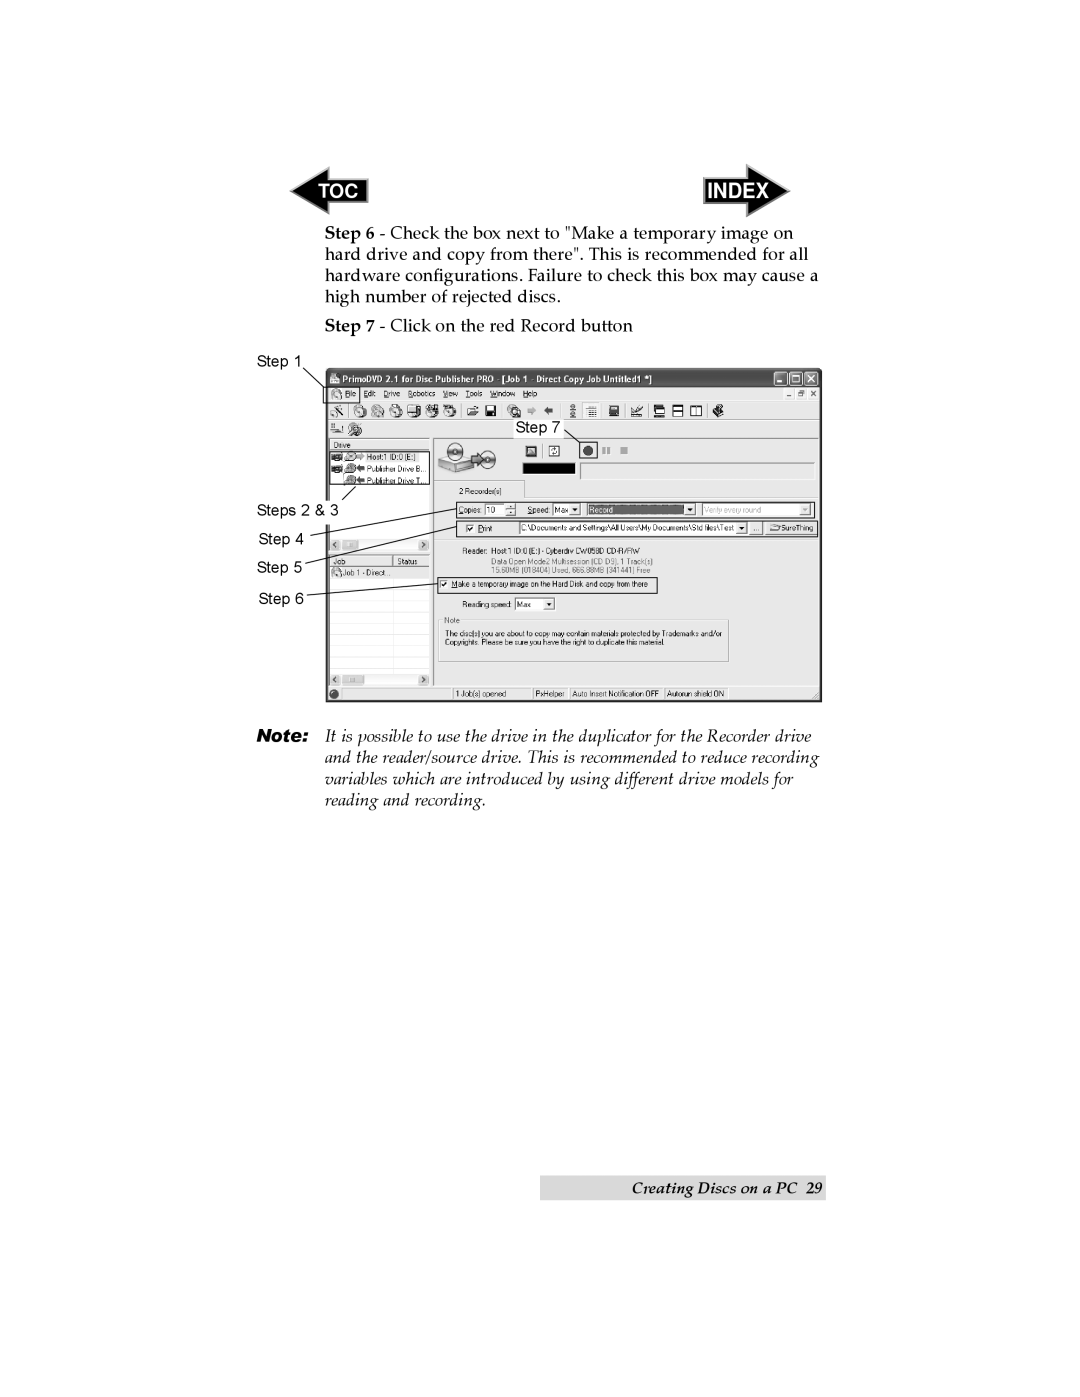 Primera Technology II user manual Index, Click on the red Record button 